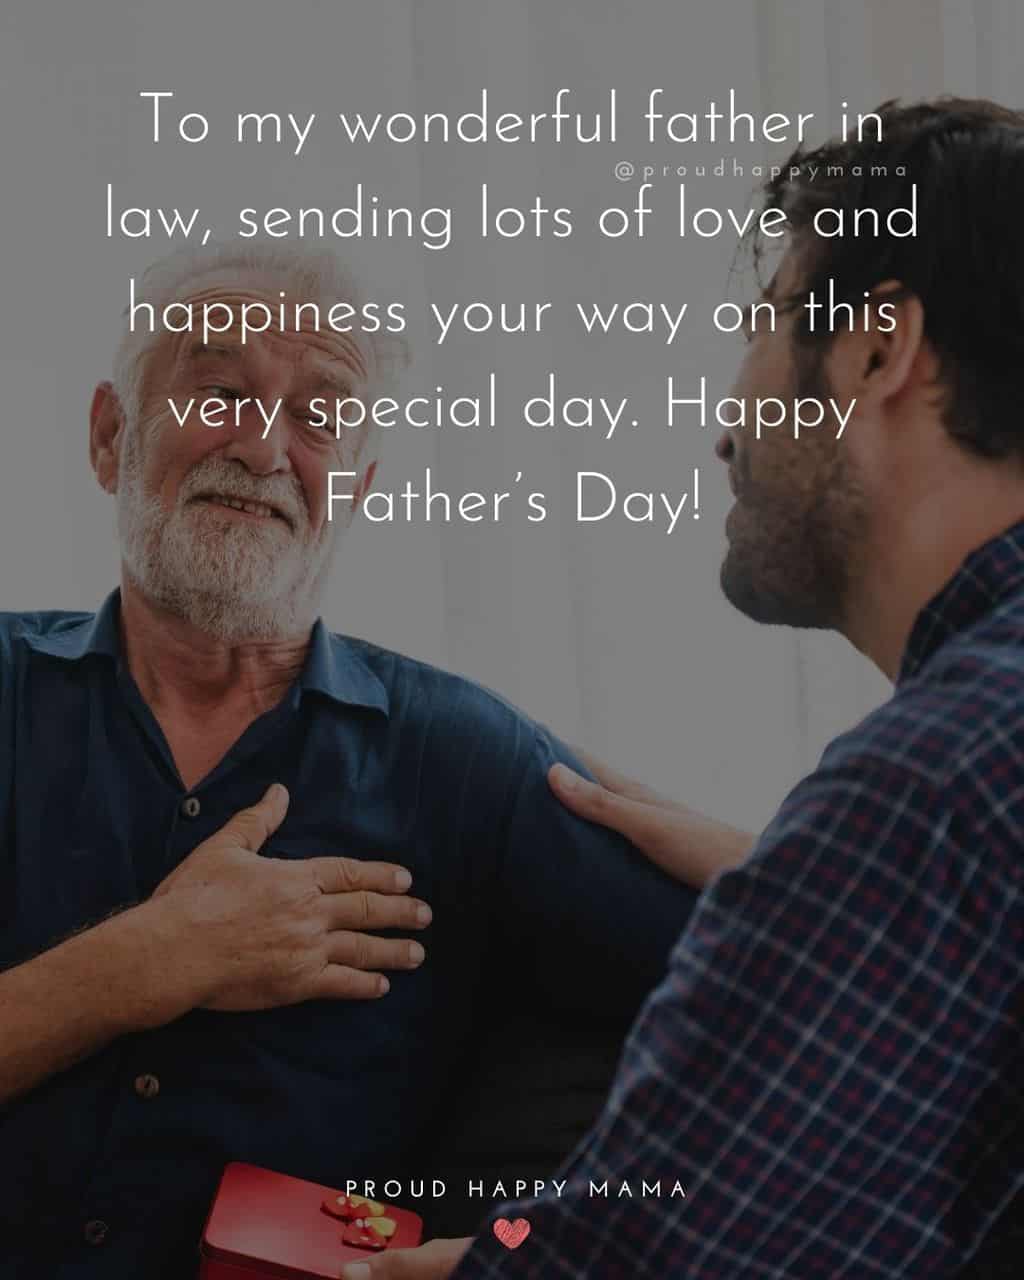 Happy Fathers Day Quotes For Father In Law - To my wonderful father in law, sending lots of love and happiness your way on this